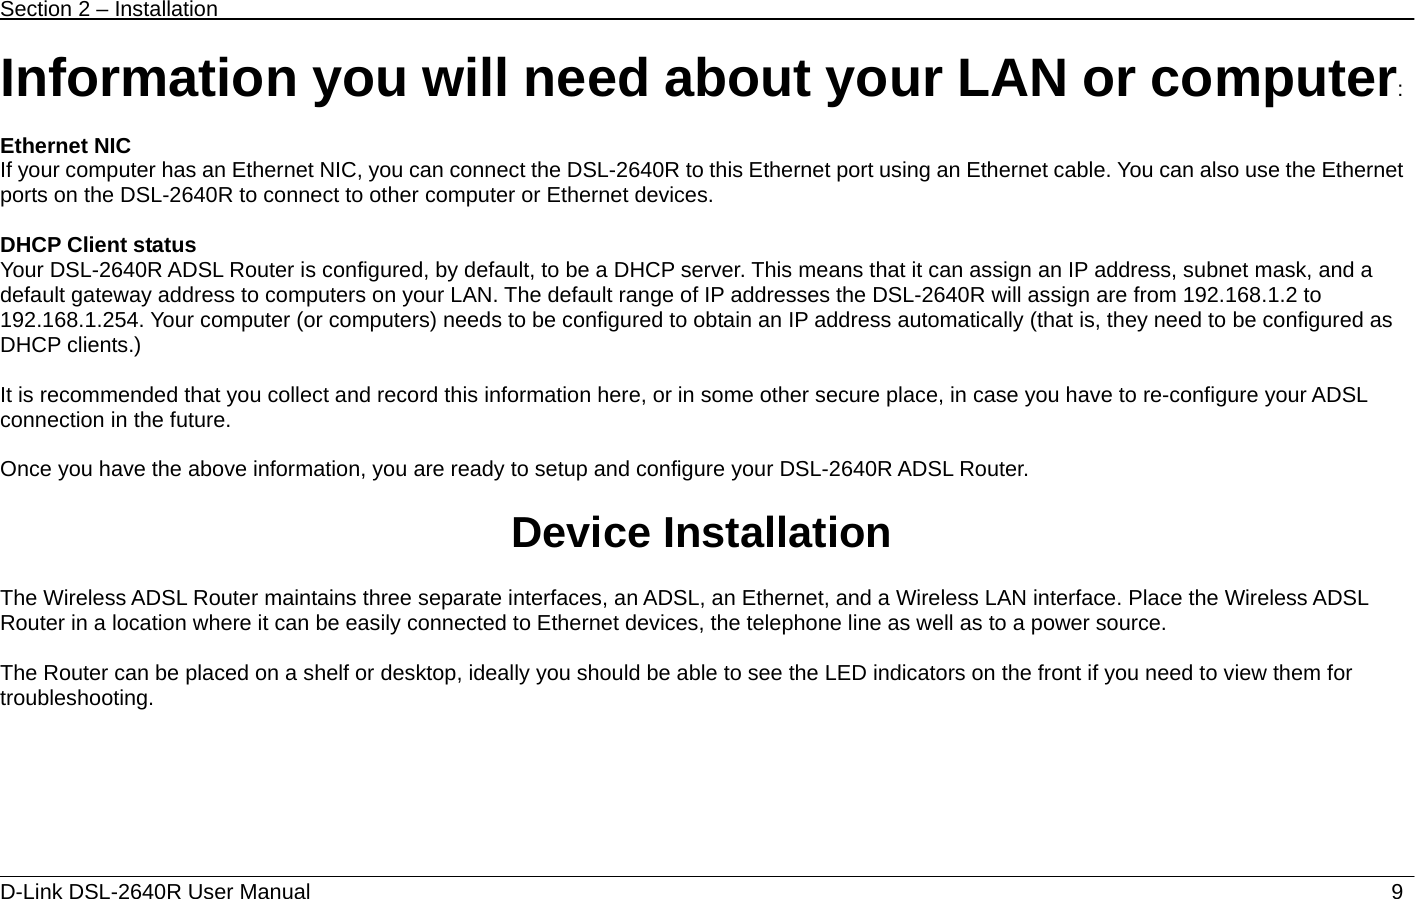 Section 2 – Installation   D-Link DSL-2640R User Manual                            9Information you will need about your LAN or computer:  Ethernet NIC If your computer has an Ethernet NIC, you can connect the DSL-2640R to this Ethernet port using an Ethernet cable. You can also use the Ethernet ports on the DSL-2640R to connect to other computer or Ethernet devices.  DHCP Client status Your DSL-2640R ADSL Router is configured, by default, to be a DHCP server. This means that it can assign an IP address, subnet mask, and a default gateway address to computers on your LAN. The default range of IP addresses the DSL-2640R will assign are from 192.168.1.2 to 192.168.1.254. Your computer (or computers) needs to be configured to obtain an IP address automatically (that is, they need to be configured as DHCP clients.)      It is recommended that you collect and record this information here, or in some other secure place, in case you have to re-configure your ADSL connection in the future.  Once you have the above information, you are ready to setup and configure your DSL-2640R ADSL Router.  Device Installation  The Wireless ADSL Router maintains three separate interfaces, an ADSL, an Ethernet, and a Wireless LAN interface. Place the Wireless ADSL Router in a location where it can be easily connected to Ethernet devices, the telephone line as well as to a power source.  The Router can be placed on a shelf or desktop, ideally you should be able to see the LED indicators on the front if you need to view them for troubleshooting.       